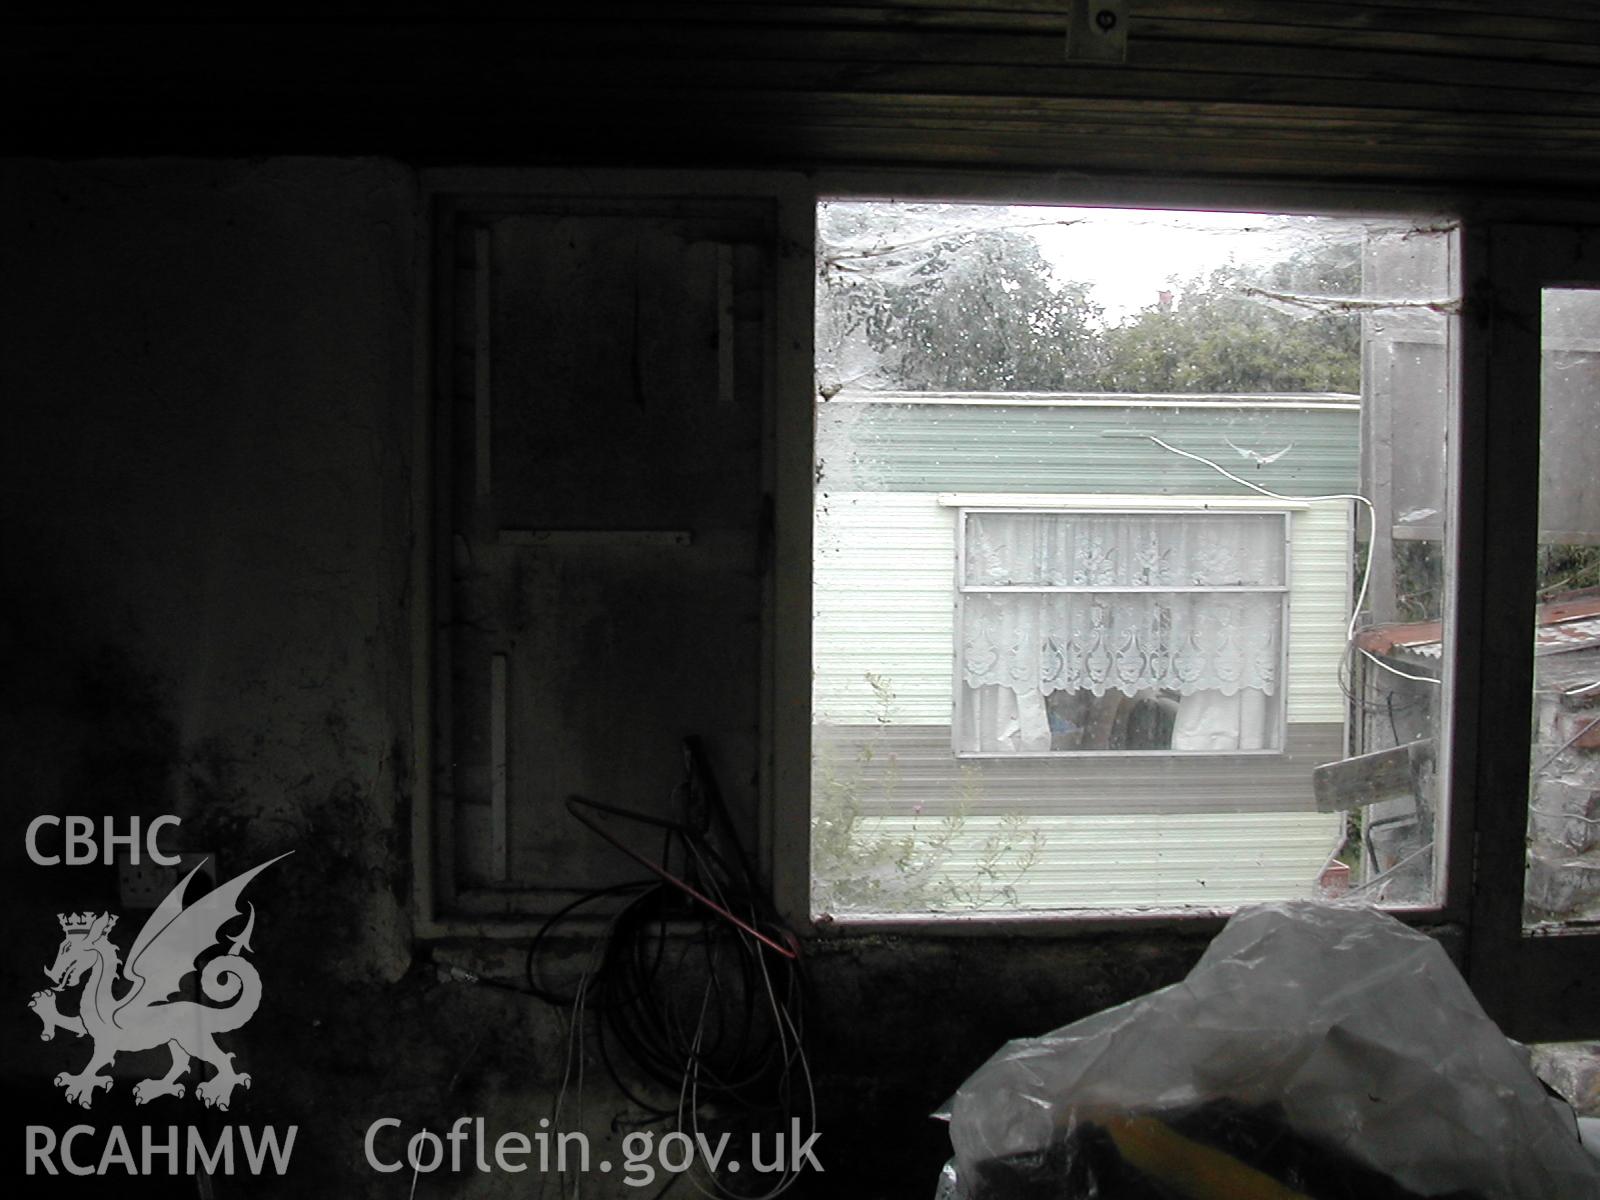 Colour photograph showing detailed interior view of window looking at caravan at Rosacre, Gronant, Prestatyn. Unknown date. Donated by the Conservation Department of Flintshire County Council, in advance of relocation to new offices.